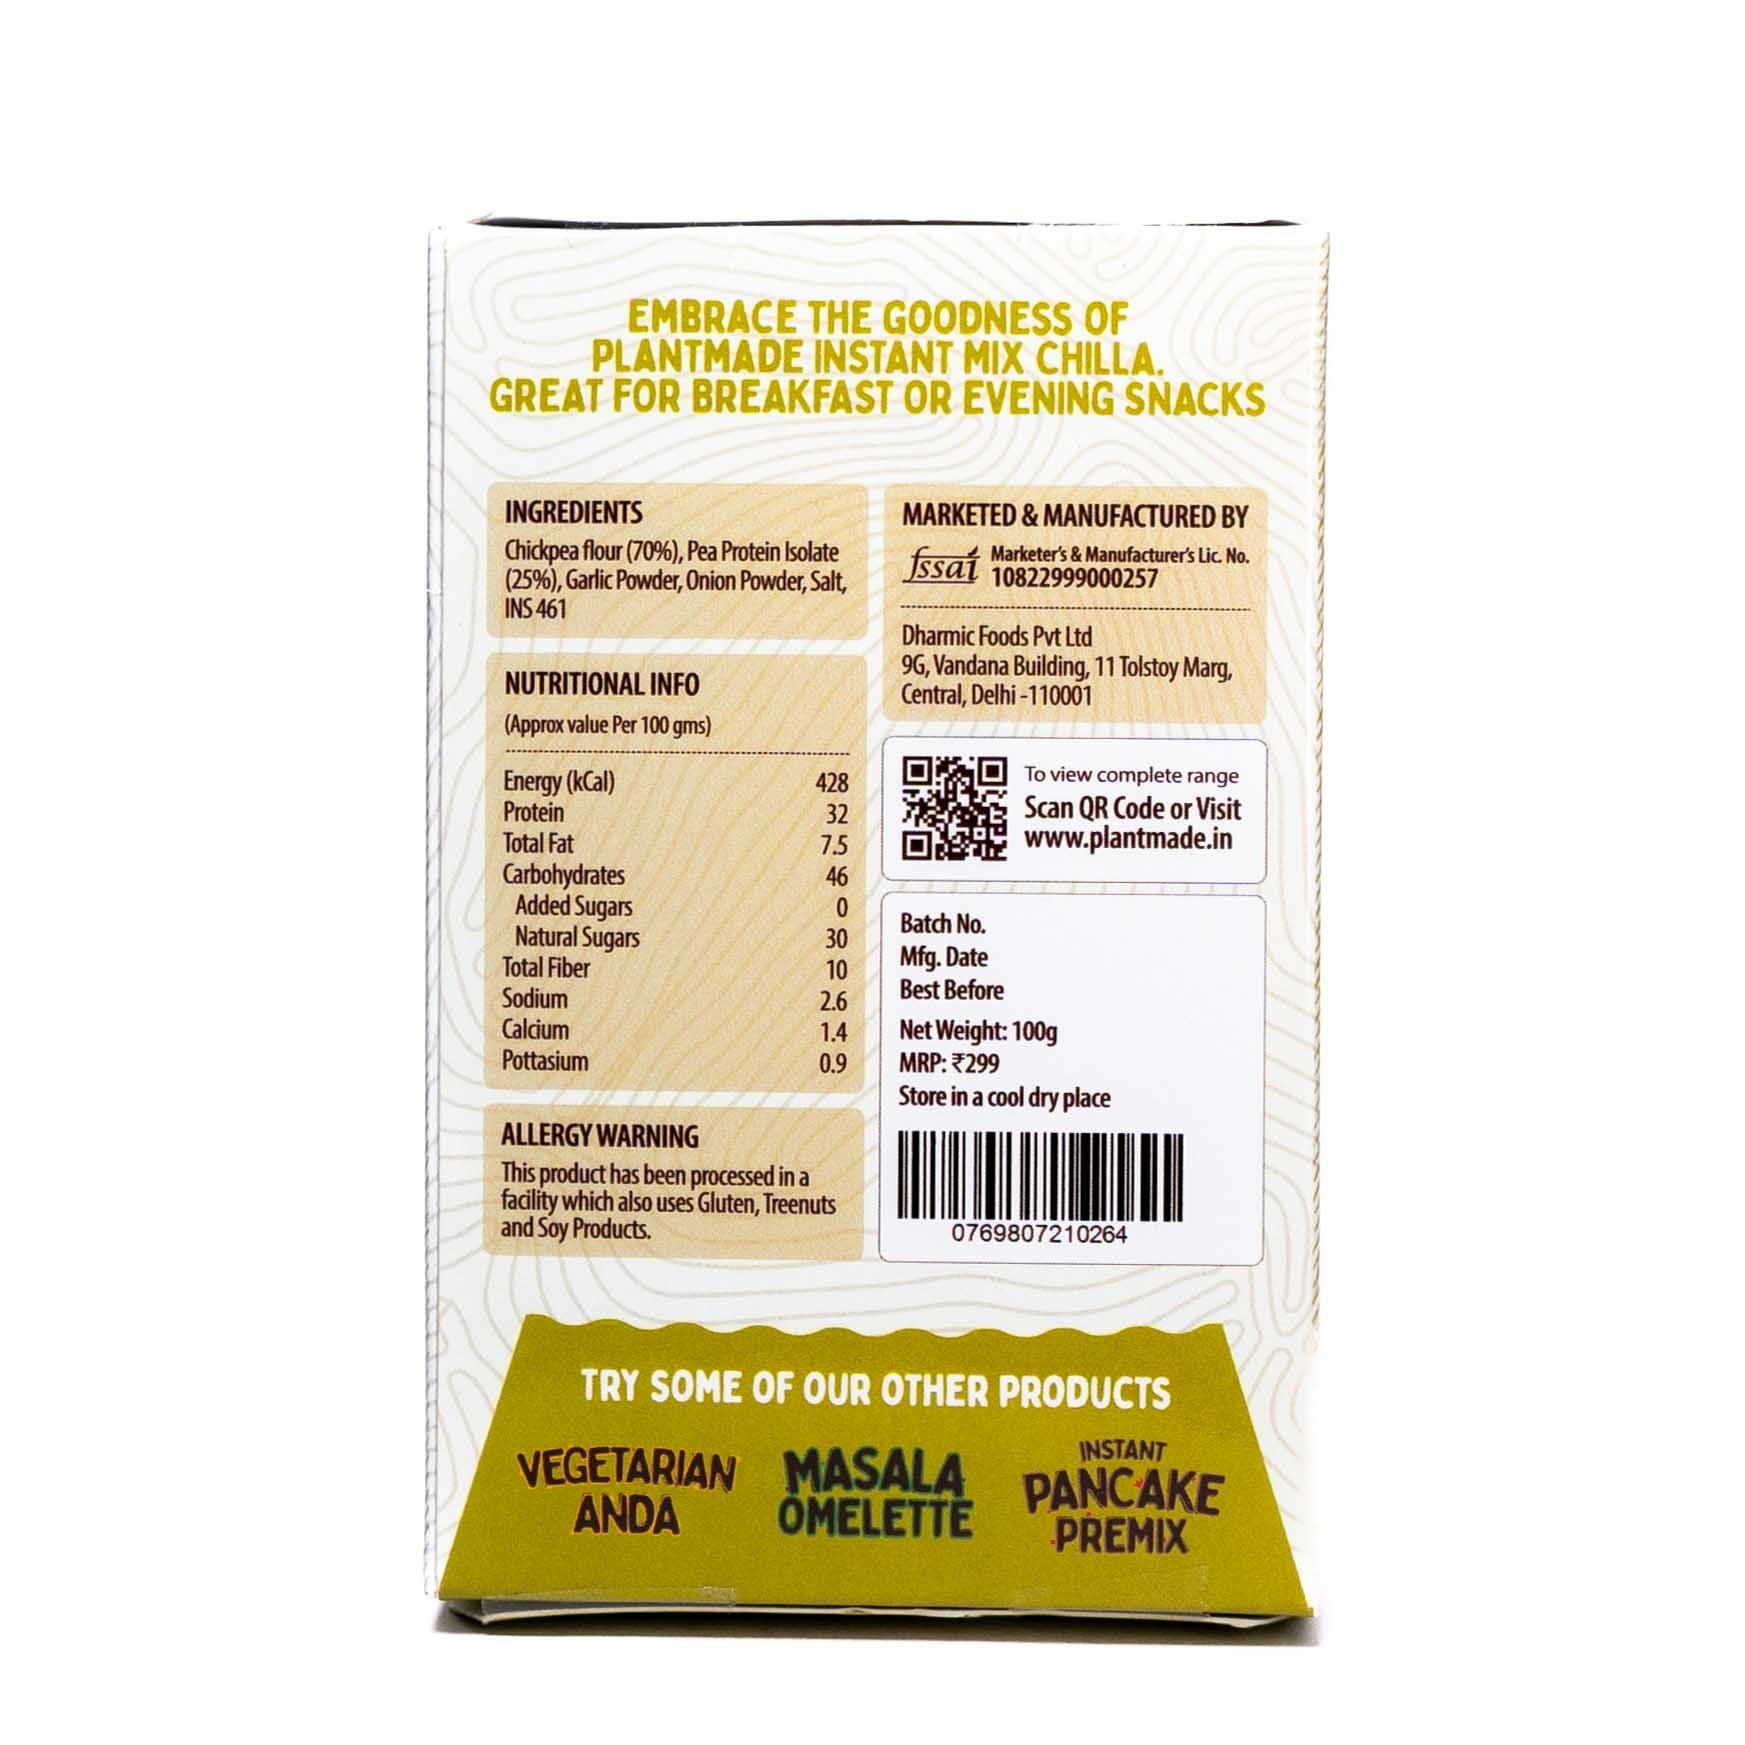 High-energy PlantMade's Instant Chilla Mix product image displaying ingredients and nutritional information - an easy breakfast and evening snack